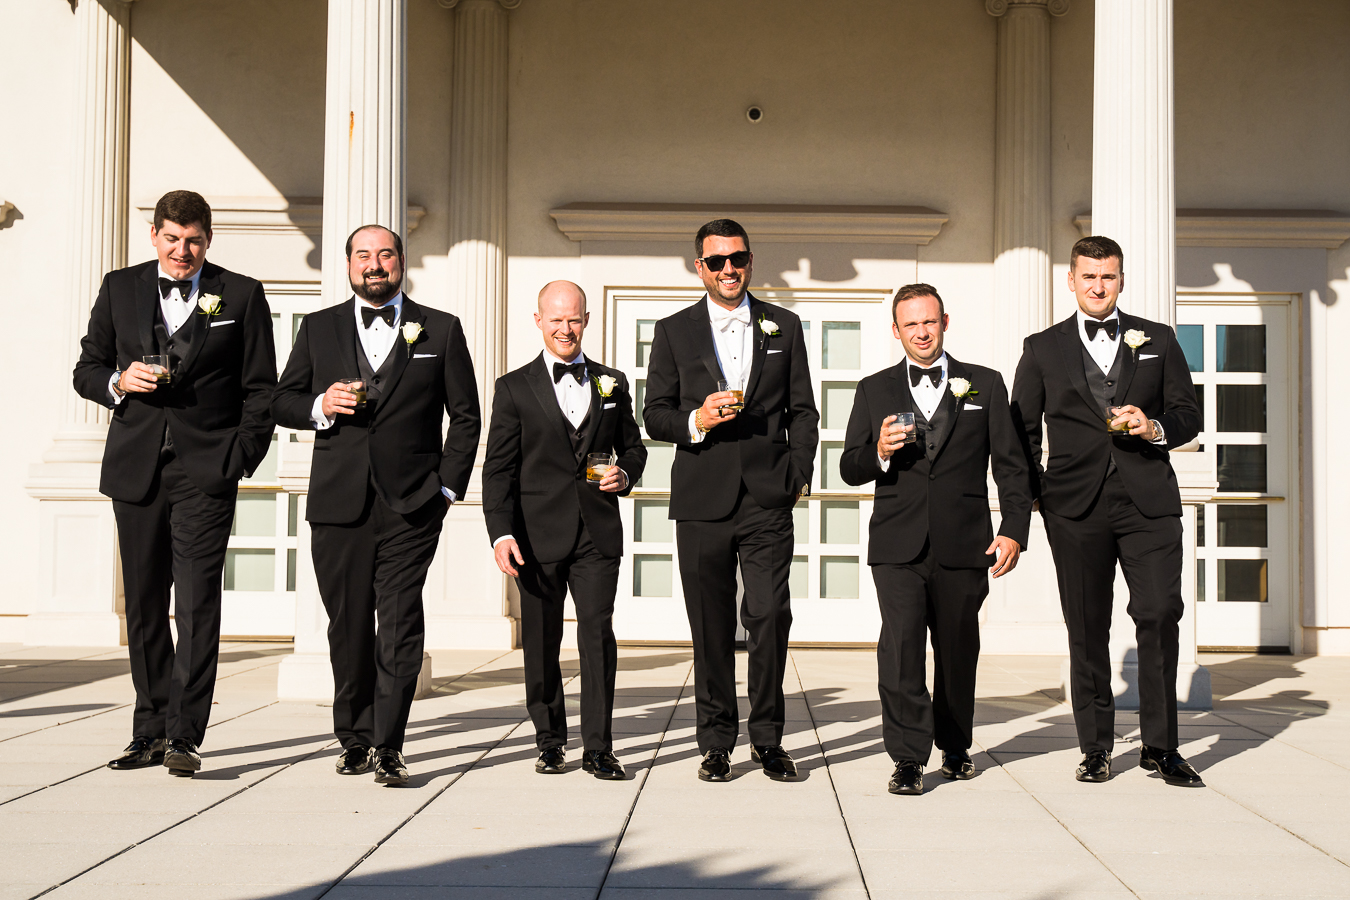 candid nj wedding photographer, lisa rhinehart, captures this fun image of the groom and his groomsmen as they walk in front of the palace at somerset park with drinks in their hand before their wedding ceremony 